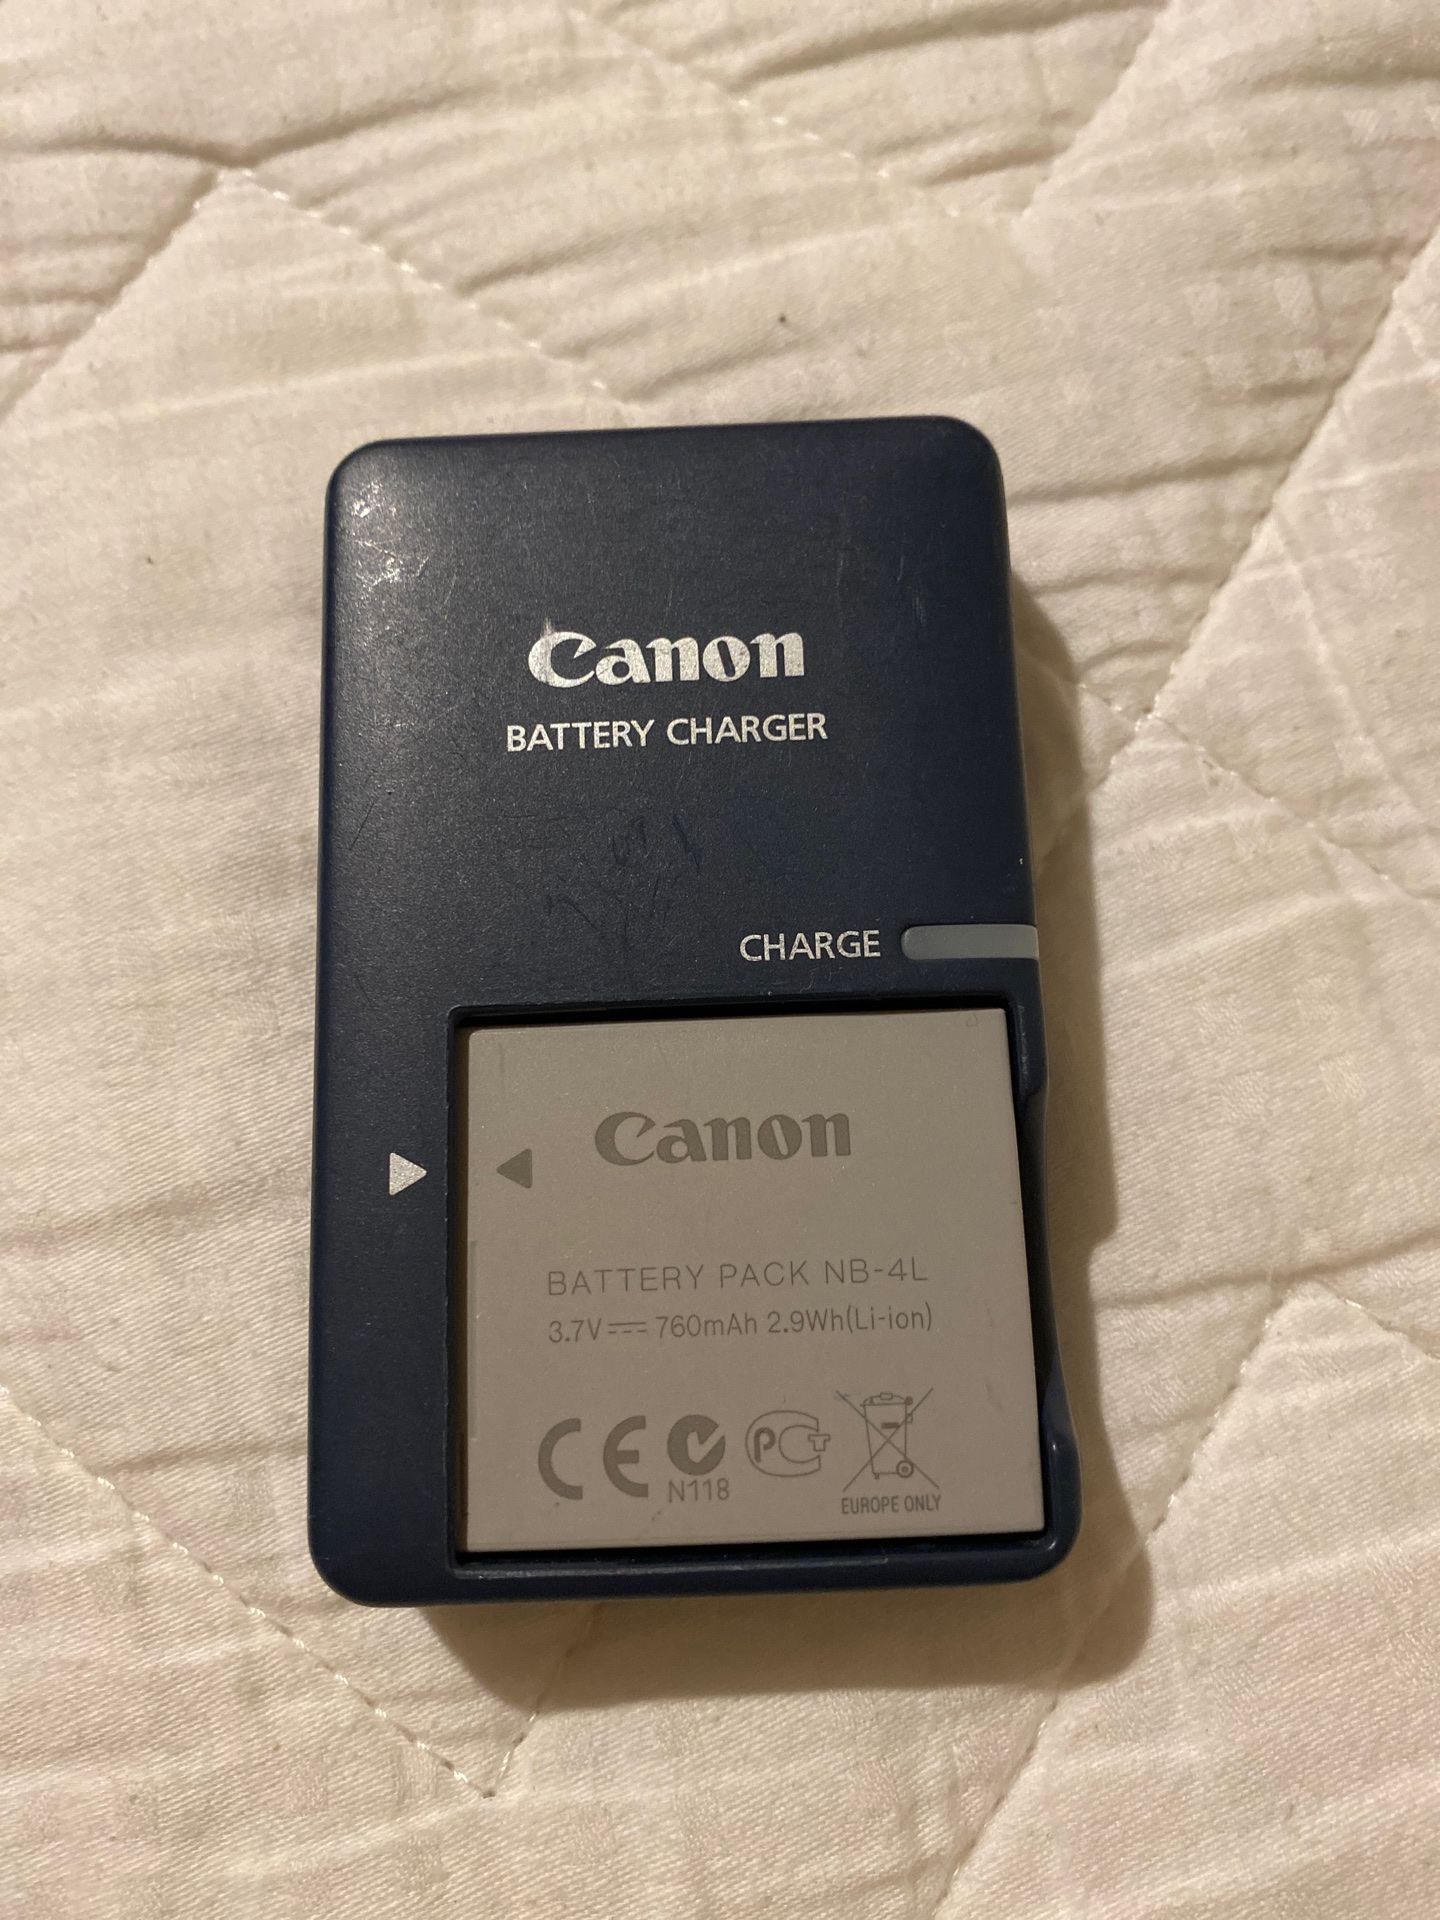 Canon battery charger CB-2LVG and canon battery pack NB-4L